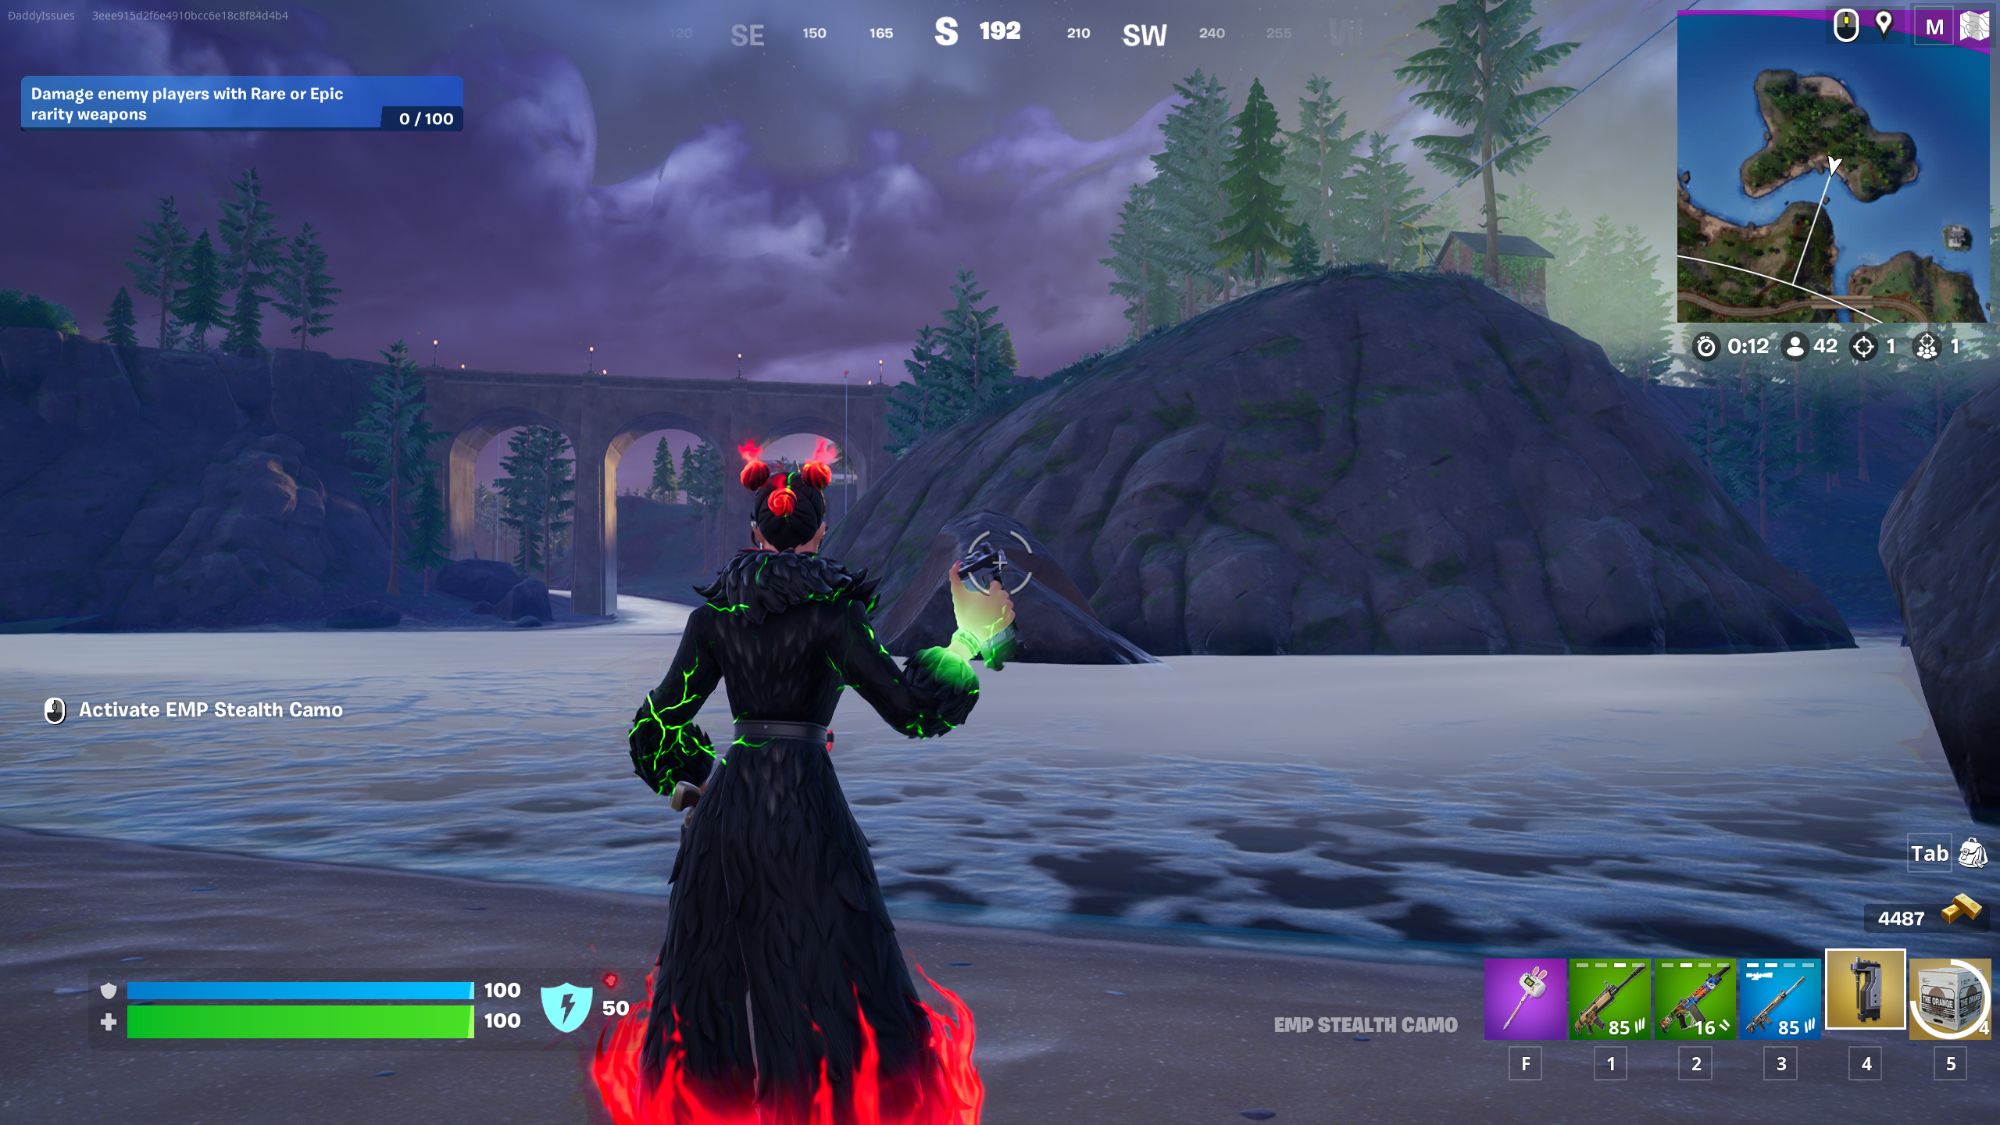 How To Find And Use The EMP Stealth Camo In Fortnite